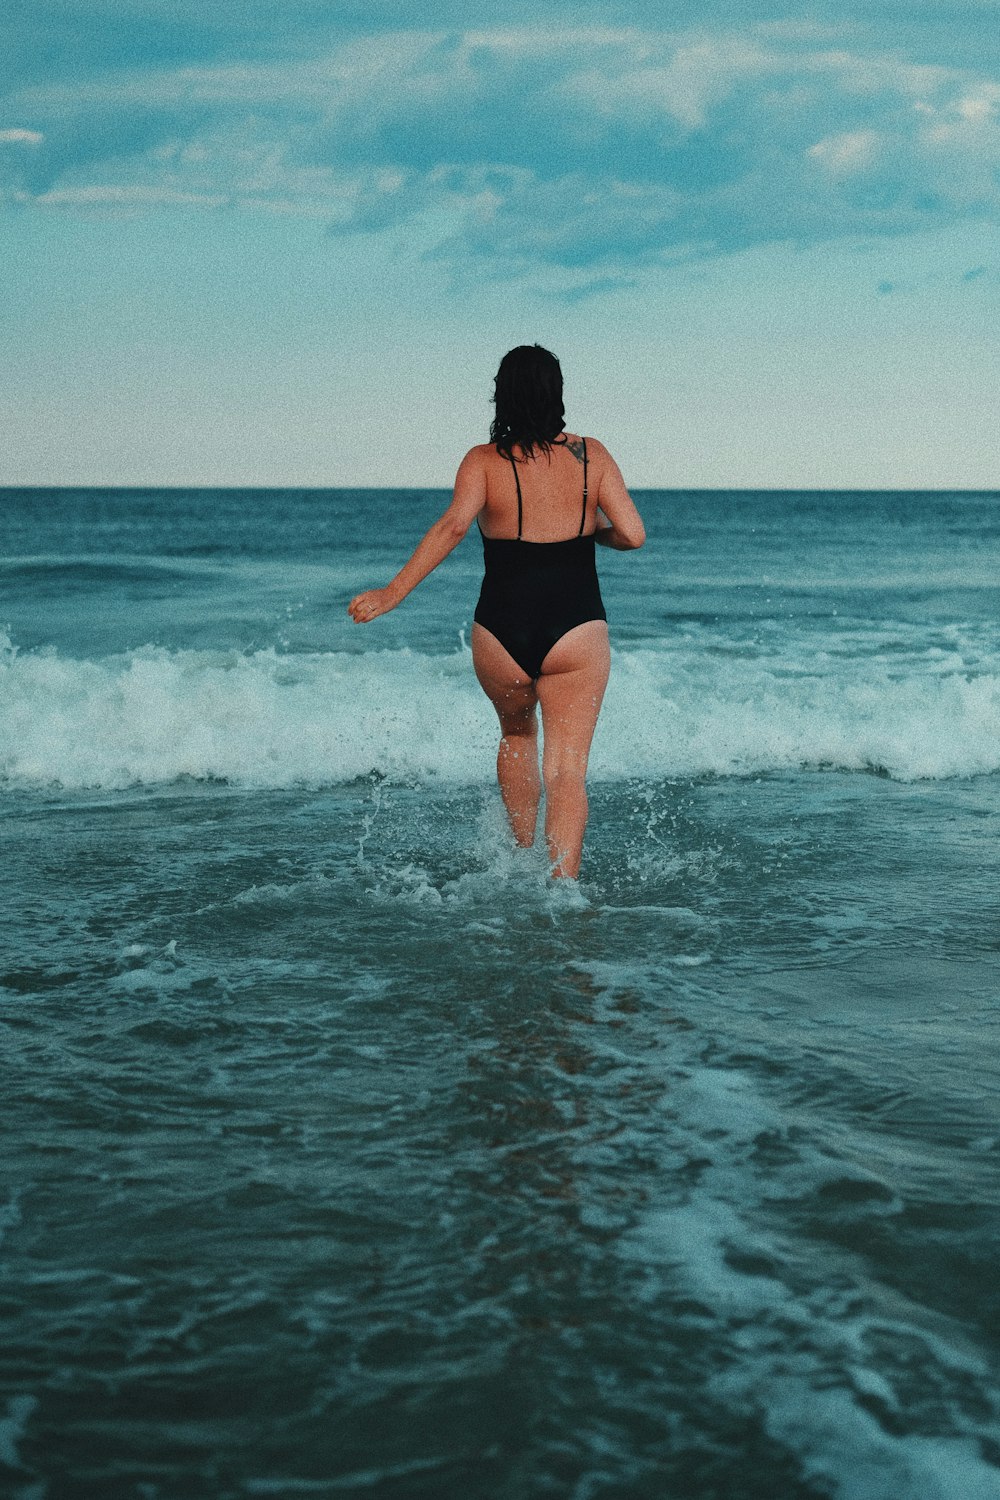 Woman in black swimsuit standing on sea water during daytime photo – Free  Ocean Image on Unsplash